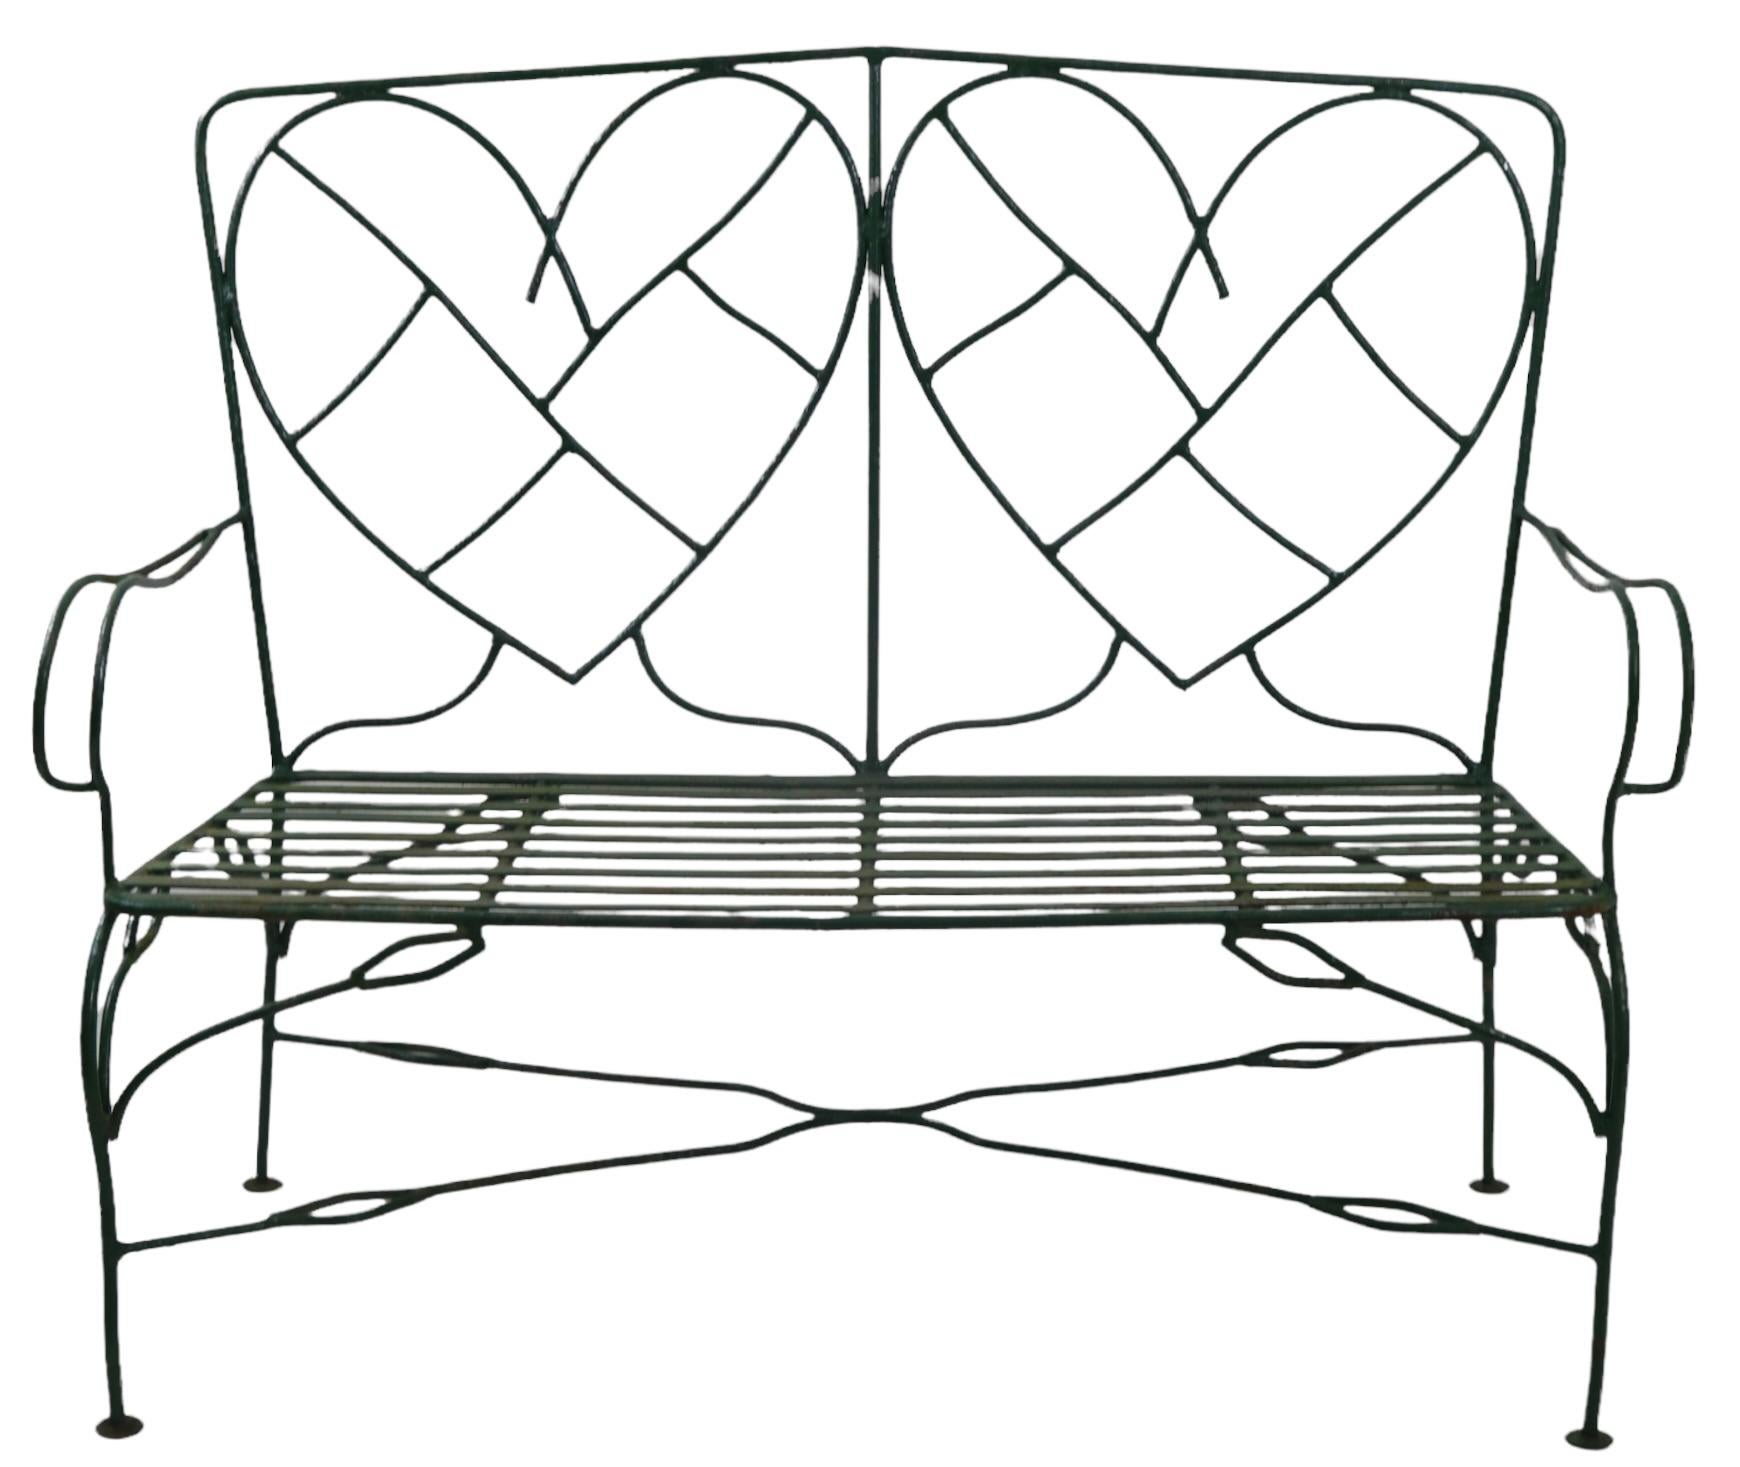 Hand Wrought Iron Settee Bench W Decorative Heart Shaped Metalwork Backrest  9